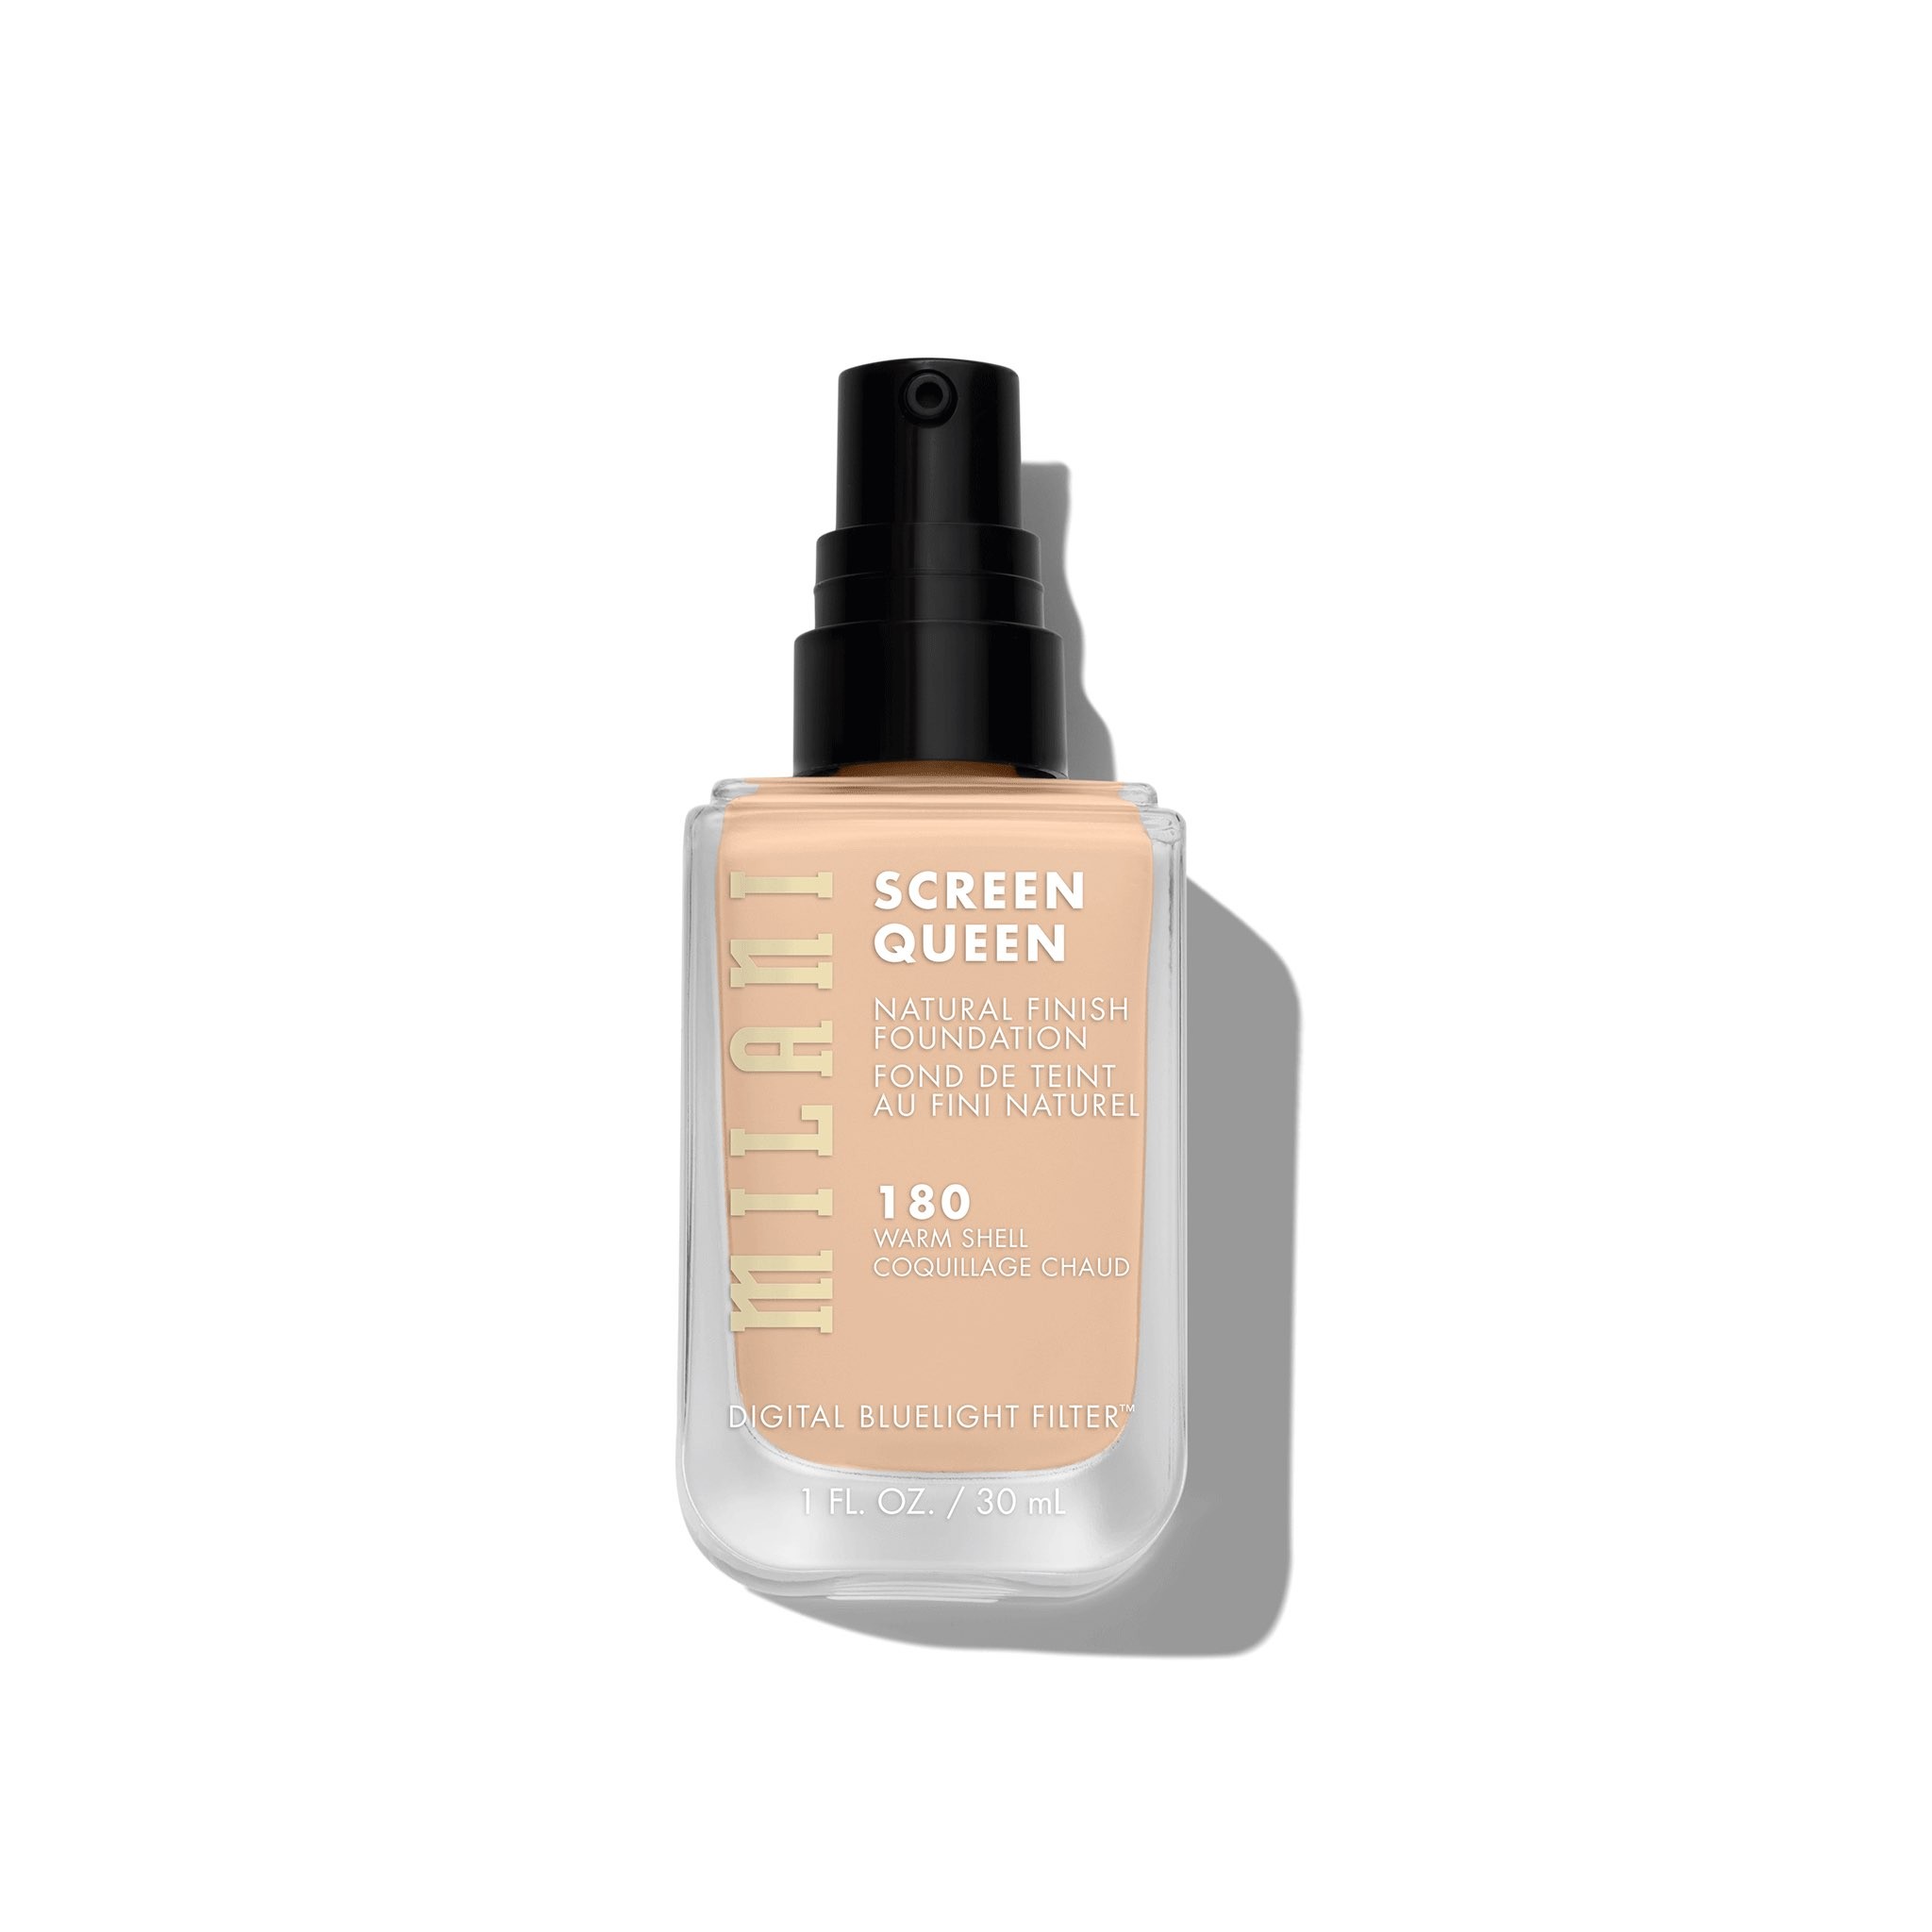 Screen Queen Natural Finish Foundation